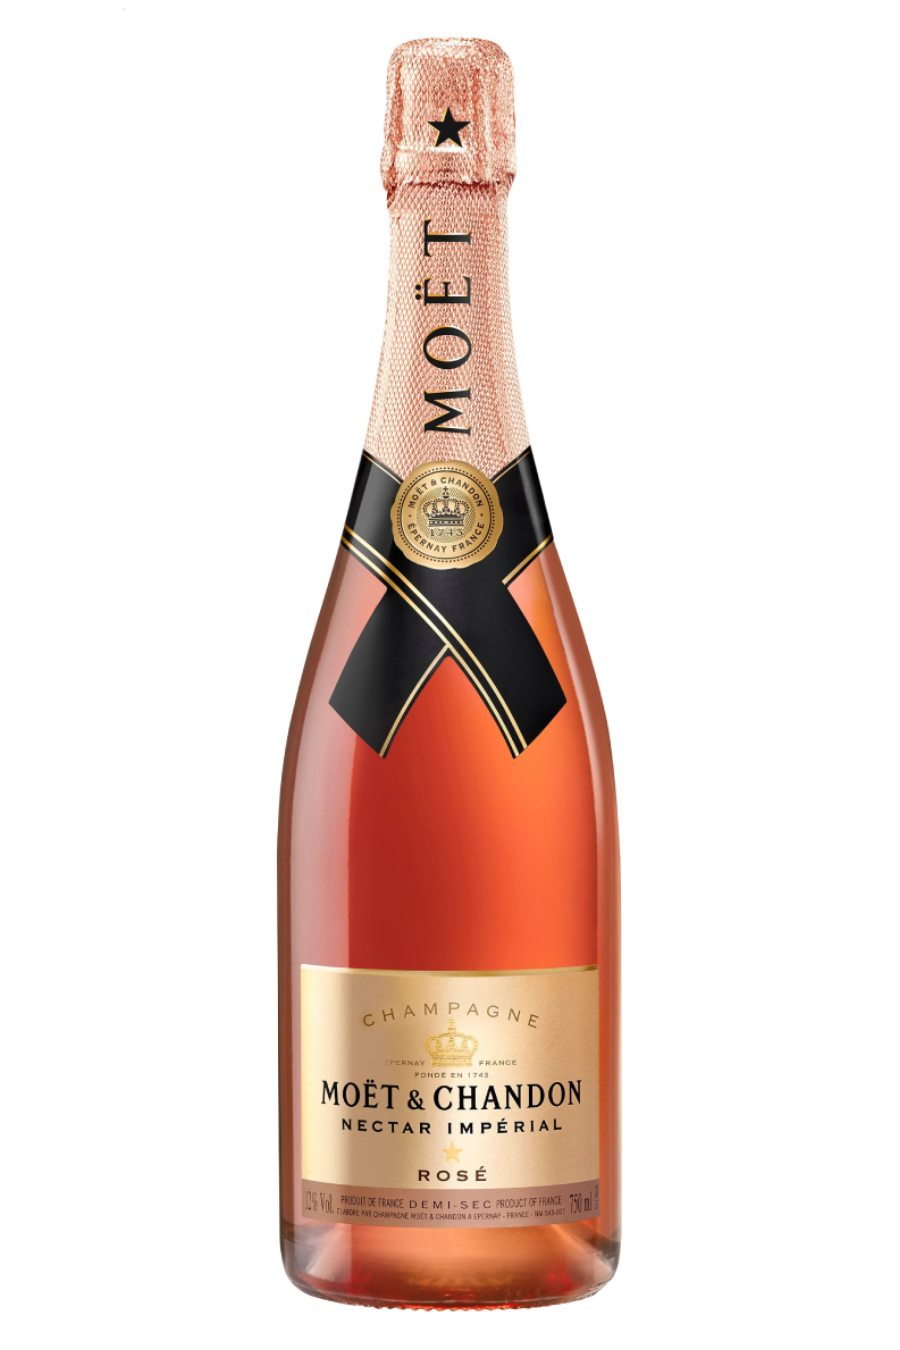 Moet & Chandon Nectar Imperial Rose | The Perfect Champagne | BuyWinesOnline